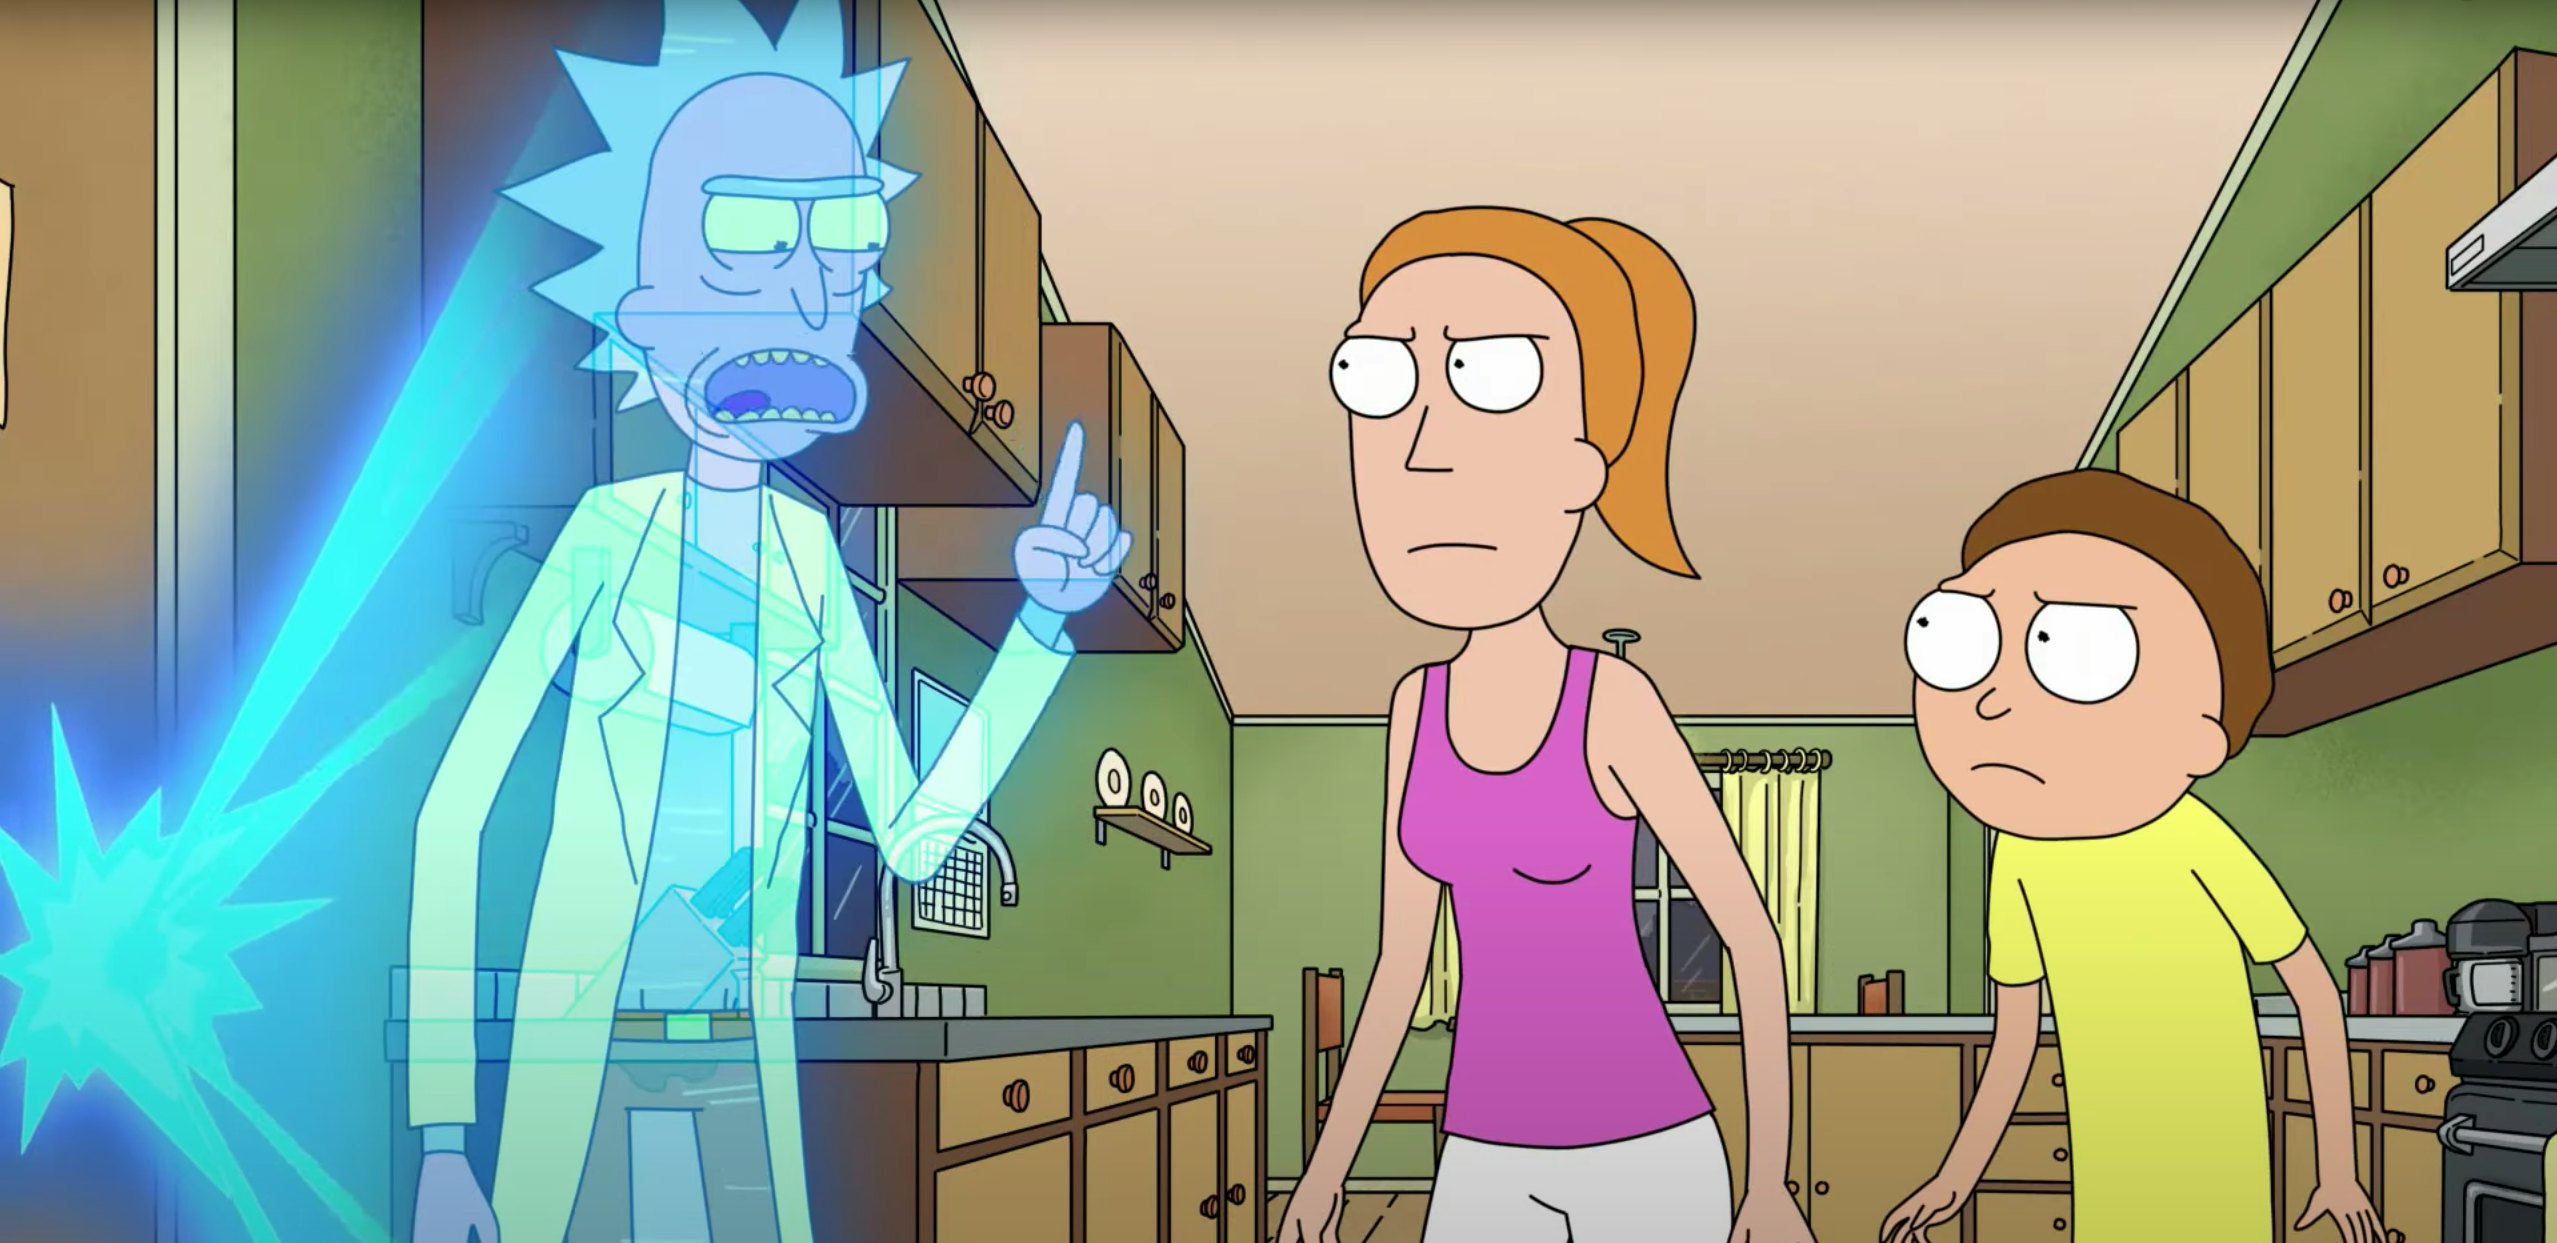 rick and morty season 2 episode 2 online